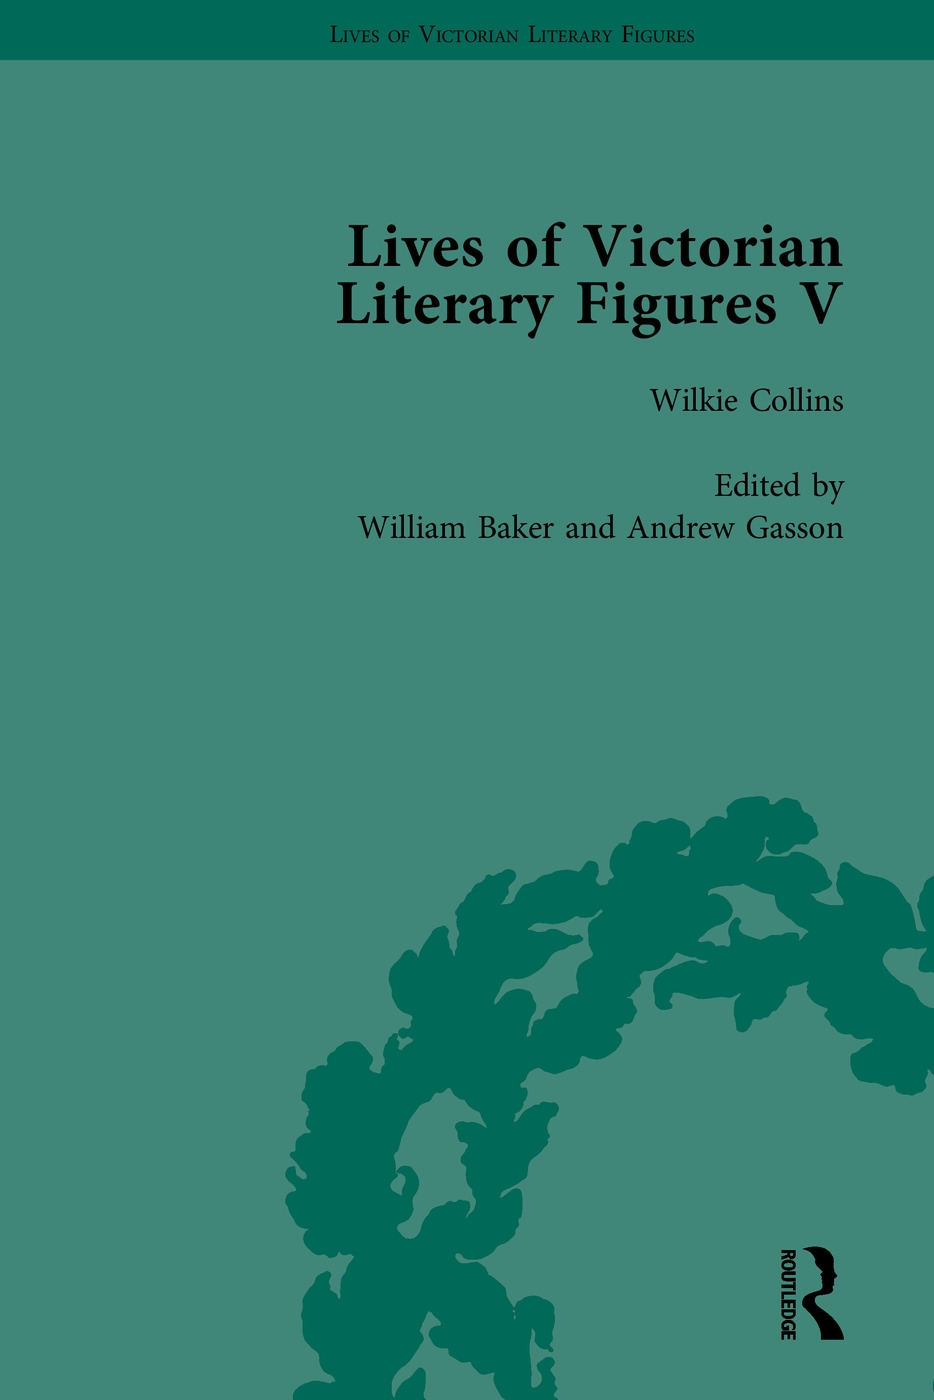 Lives of Victorian Literary Figures, Part V: Mary Elizabeth Braddon, Wilkie Collins and William Thackeray by Their Contemporaries